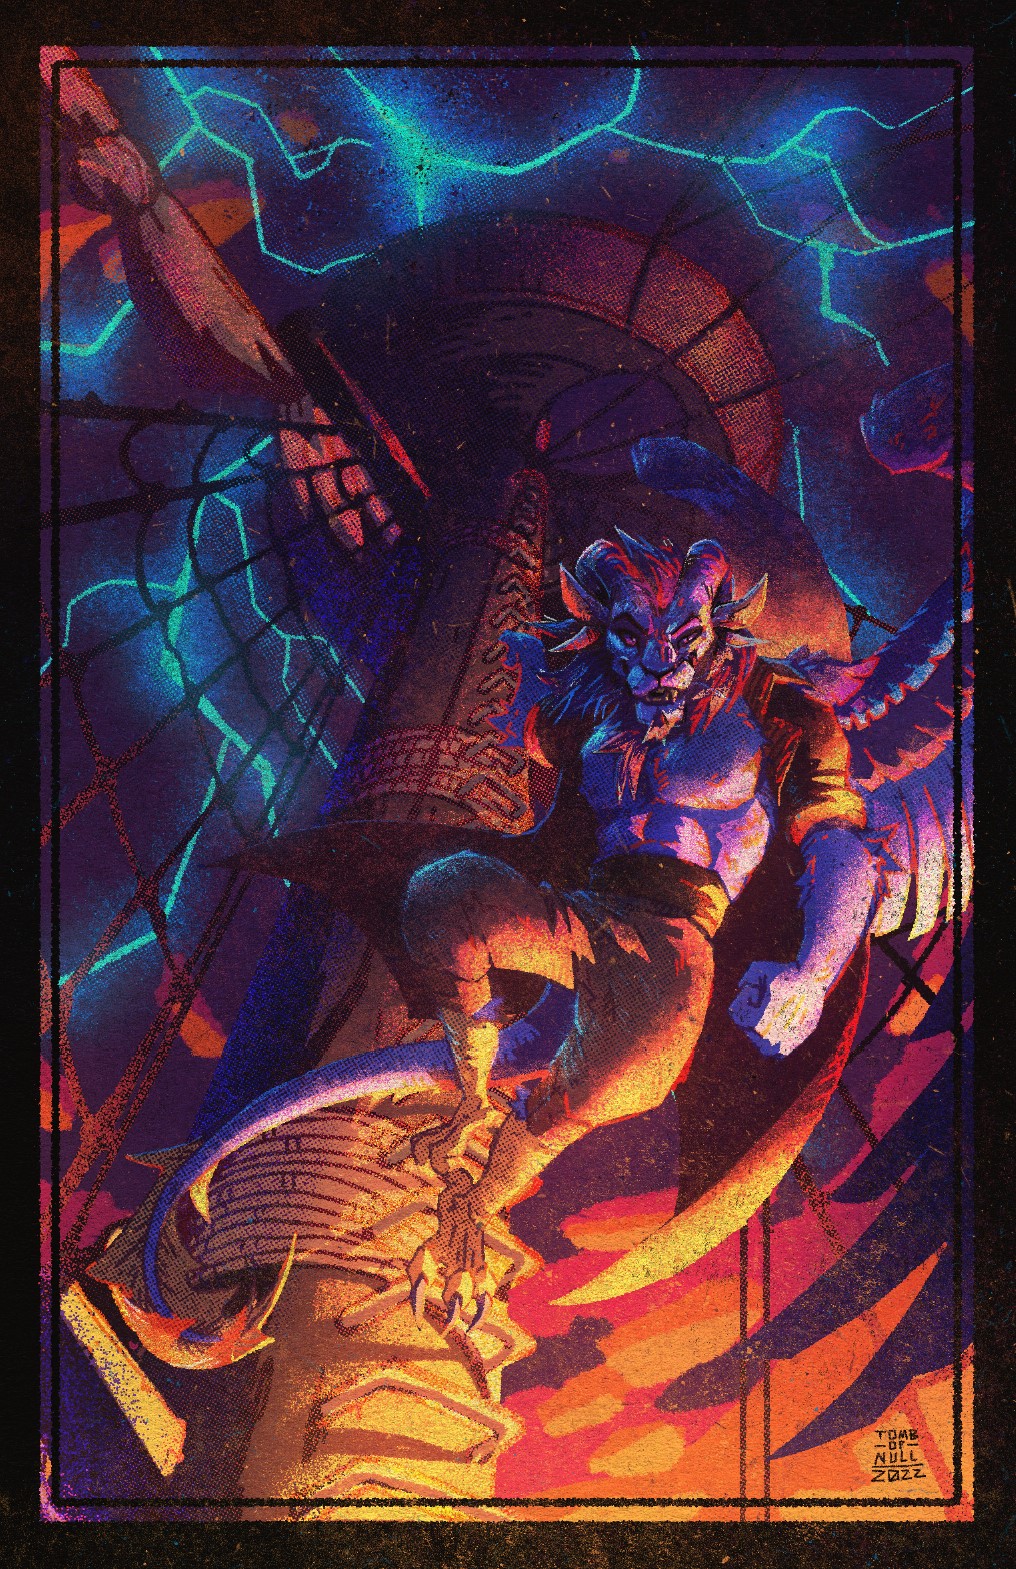 An illustration of a bipedal chimera character climbing up a pole to a crows nest. Lighting streaks across the sky above as the character gazes down past the viewer with a smarmy expression.